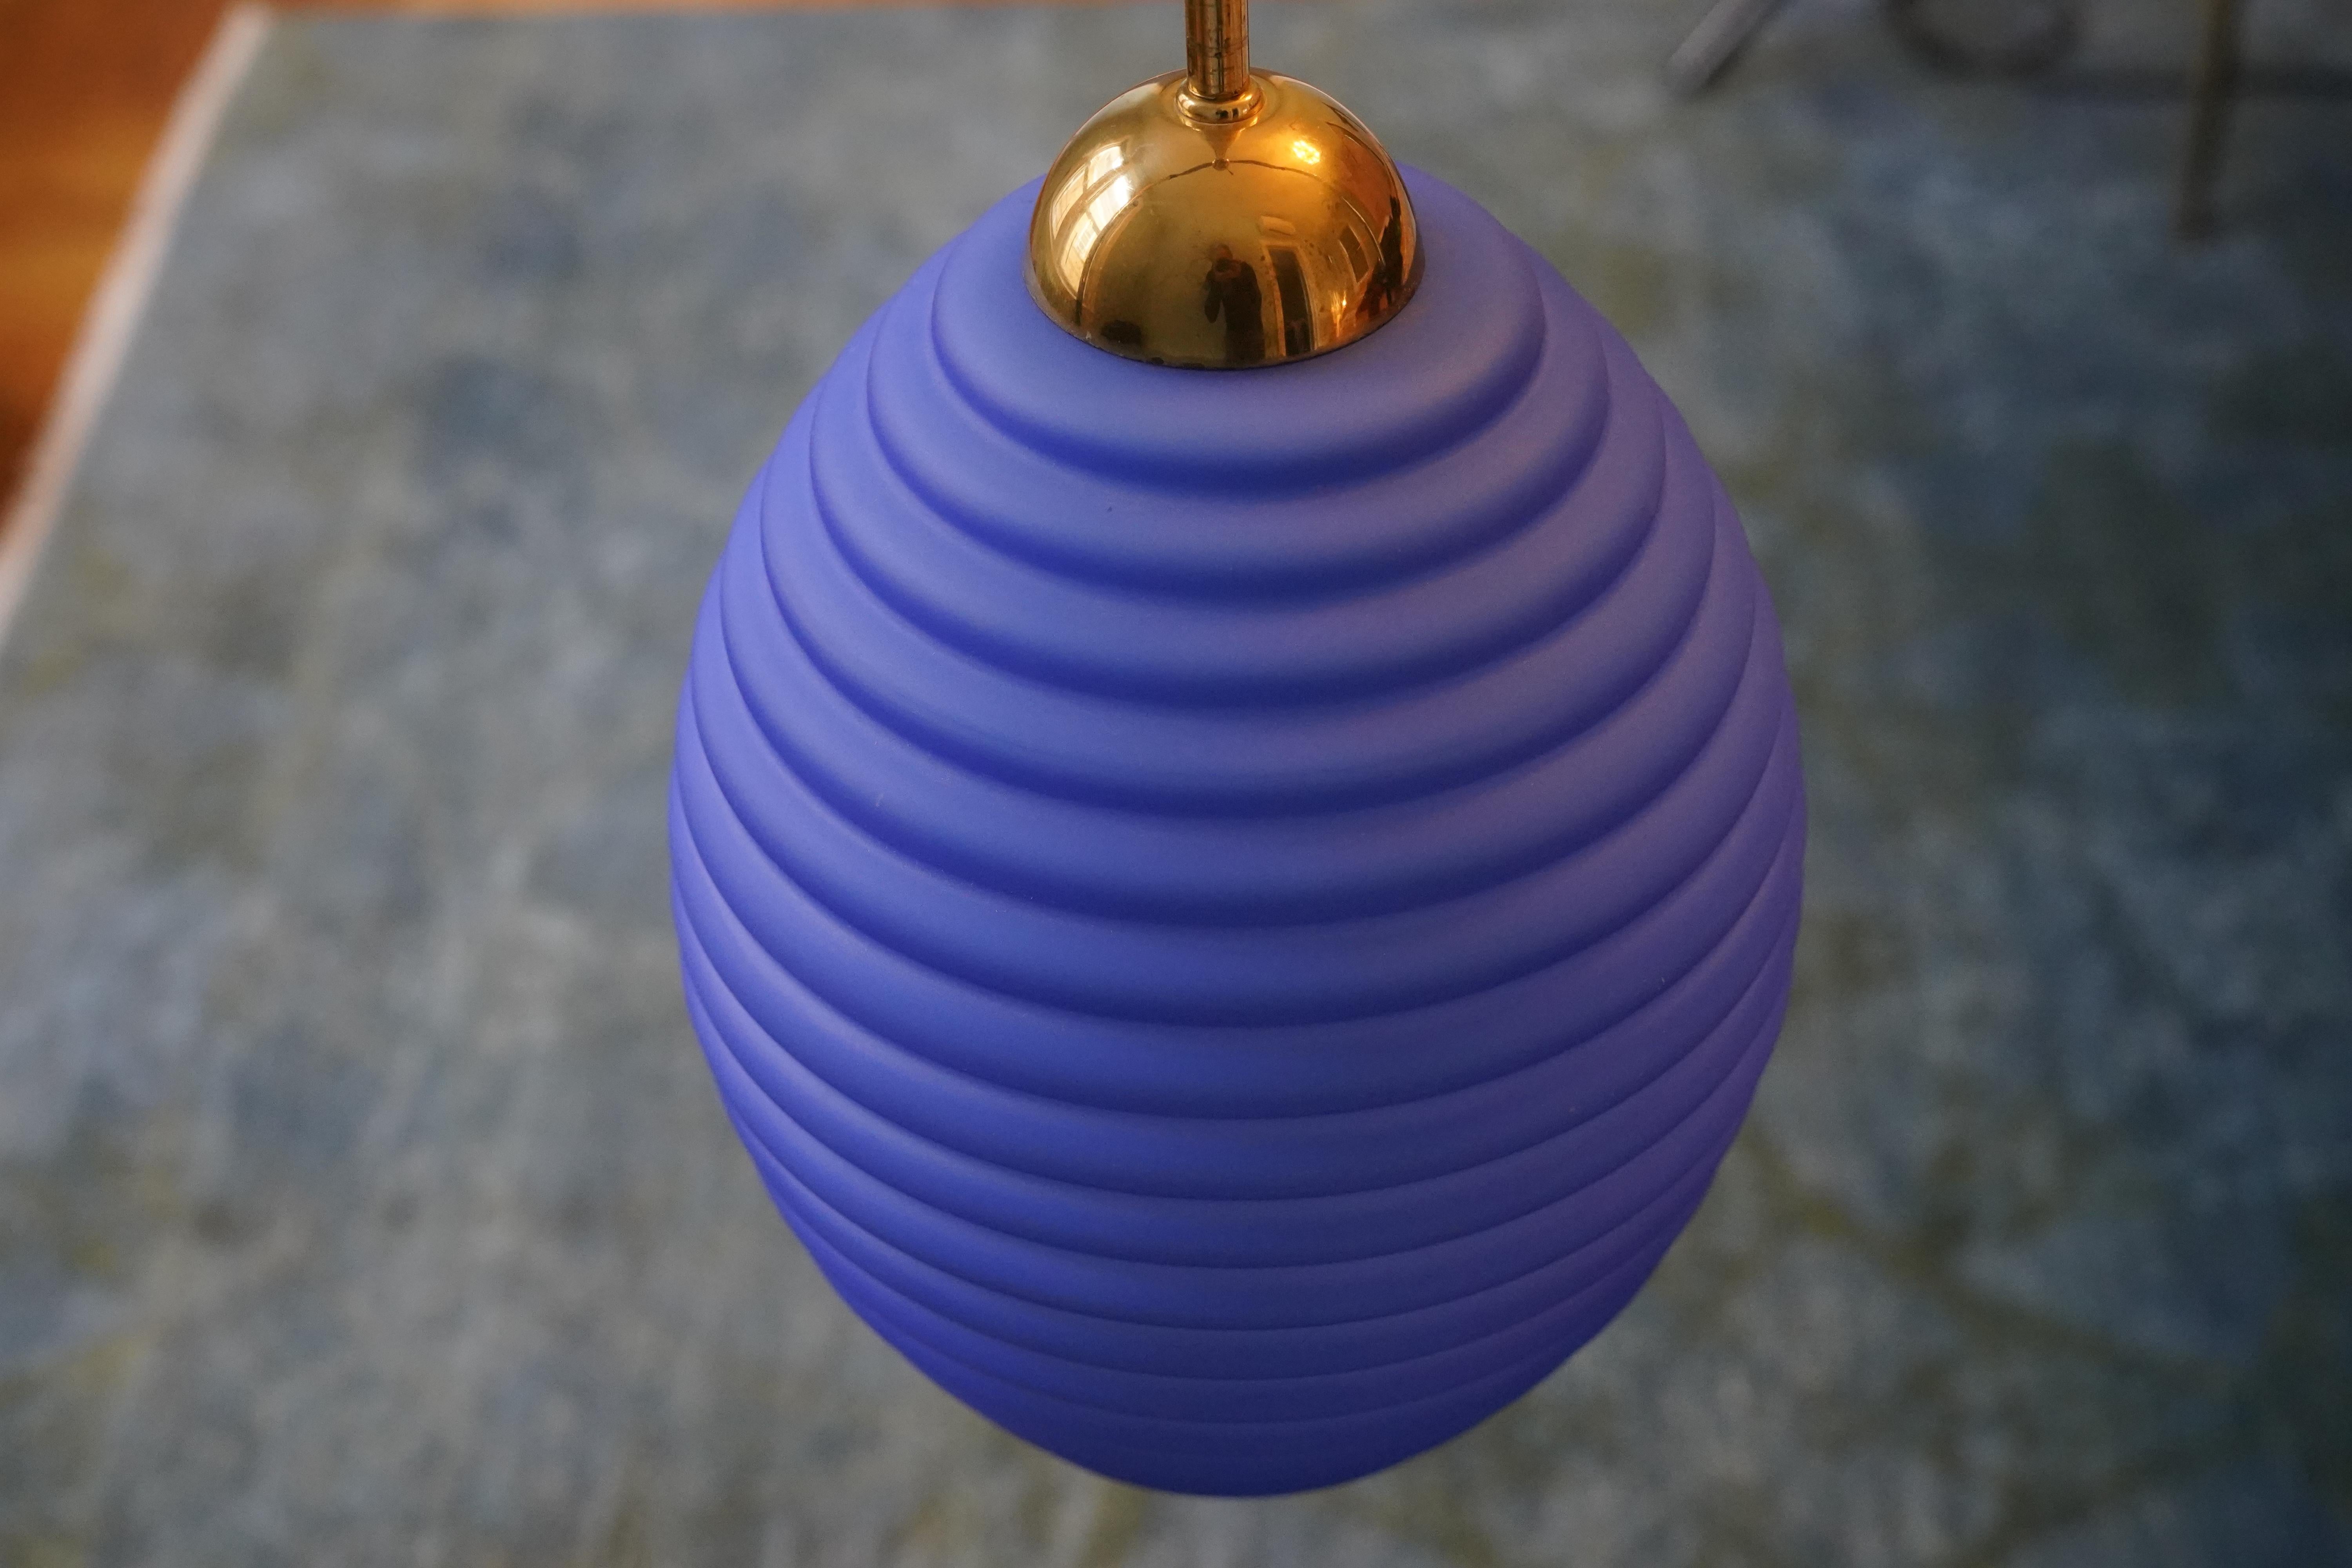 Royal blue Swedish glass lantern, 1950 
Downward light, Sweden, 1950s.
Brass stem with brass canopy, the shade is a Royal blue oval glass.
Rewired for the U.S. 